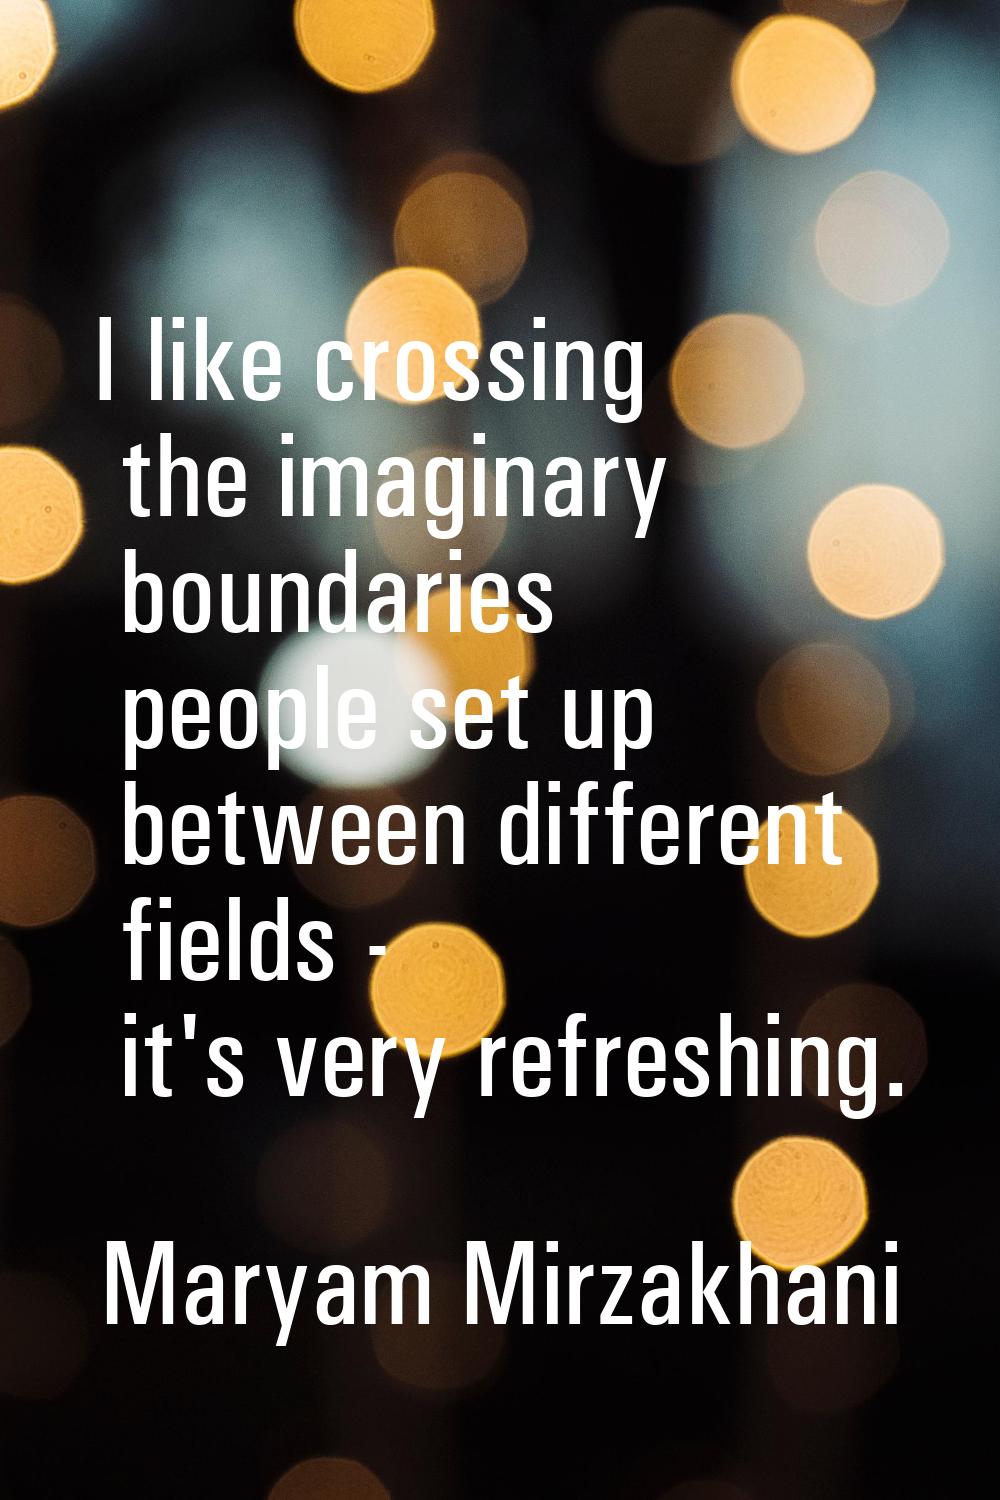 I like crossing the imaginary boundaries people set up between different fields - it's very refresh